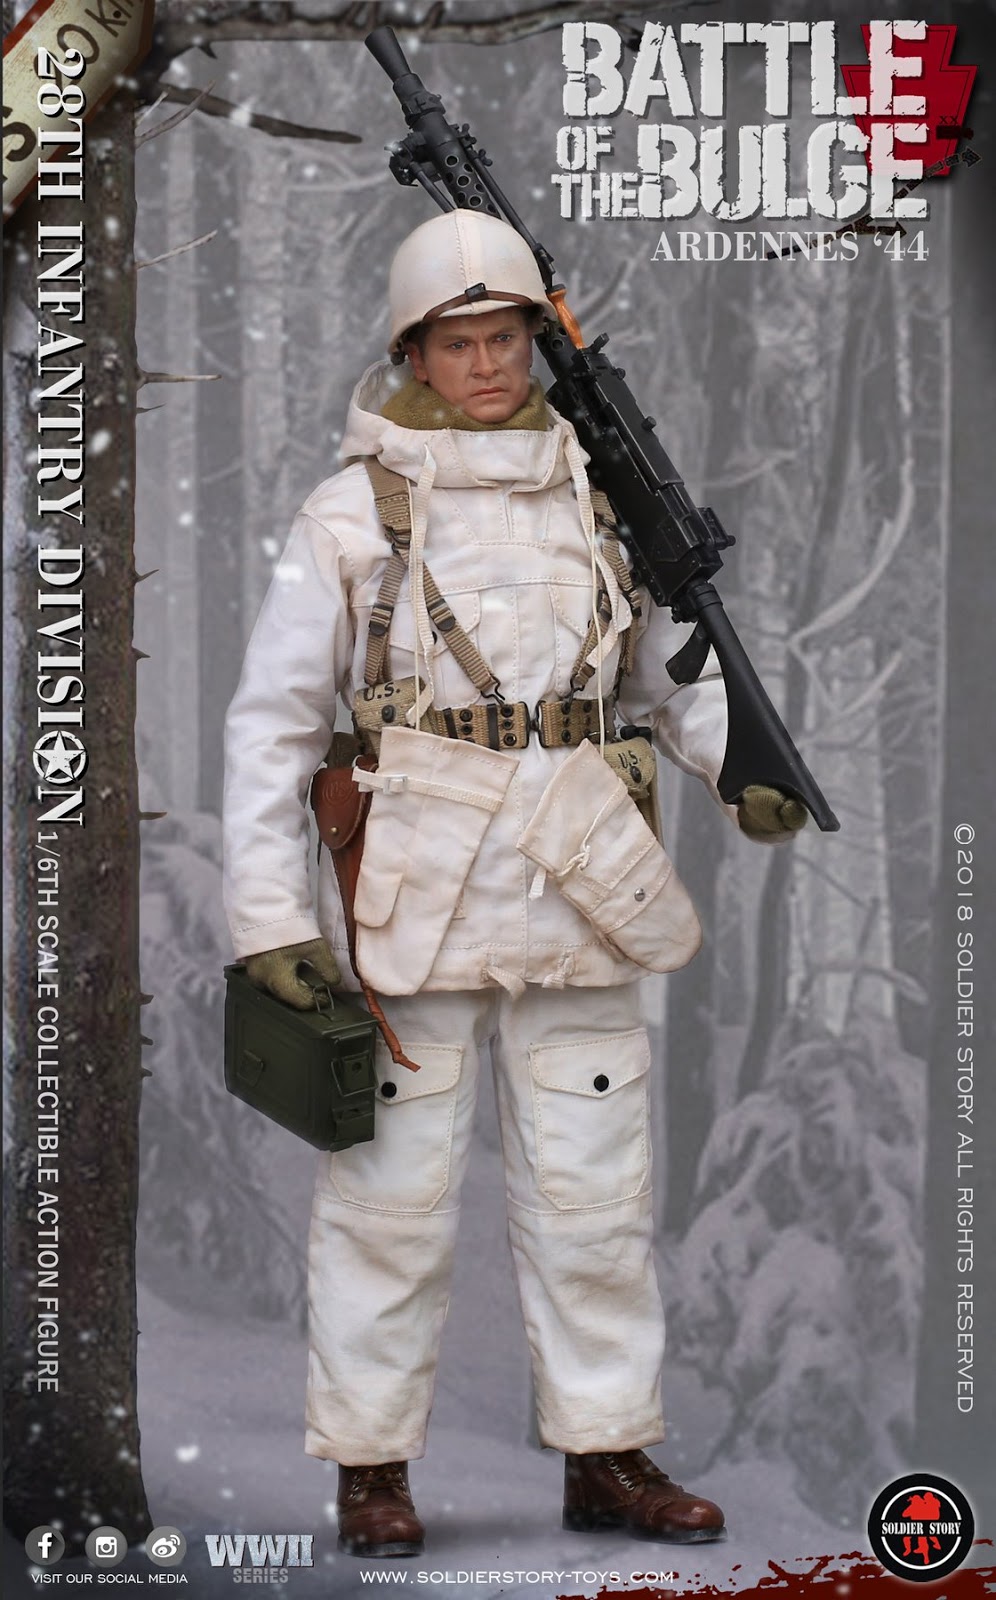 Soldierstory - NEW PRODUCT: Soldier Story: 1/6 scale U.S. Army 28th Infantry Division Ardennes 1944 Bulge010